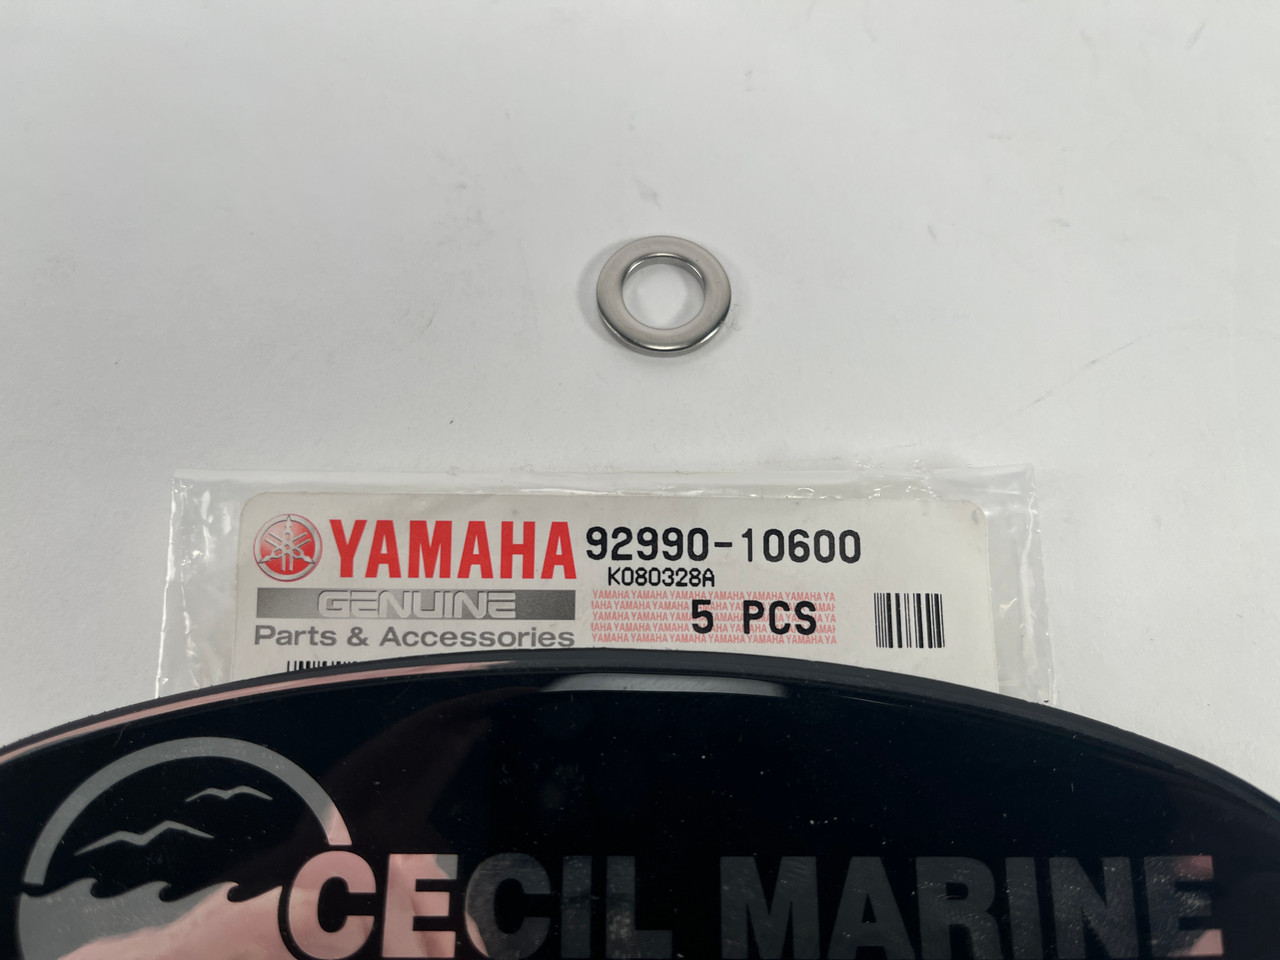 $1.99* GENUINE YAMAHA no tax* WASHER 92990-10600-00 *In Stock & Ready To Ship